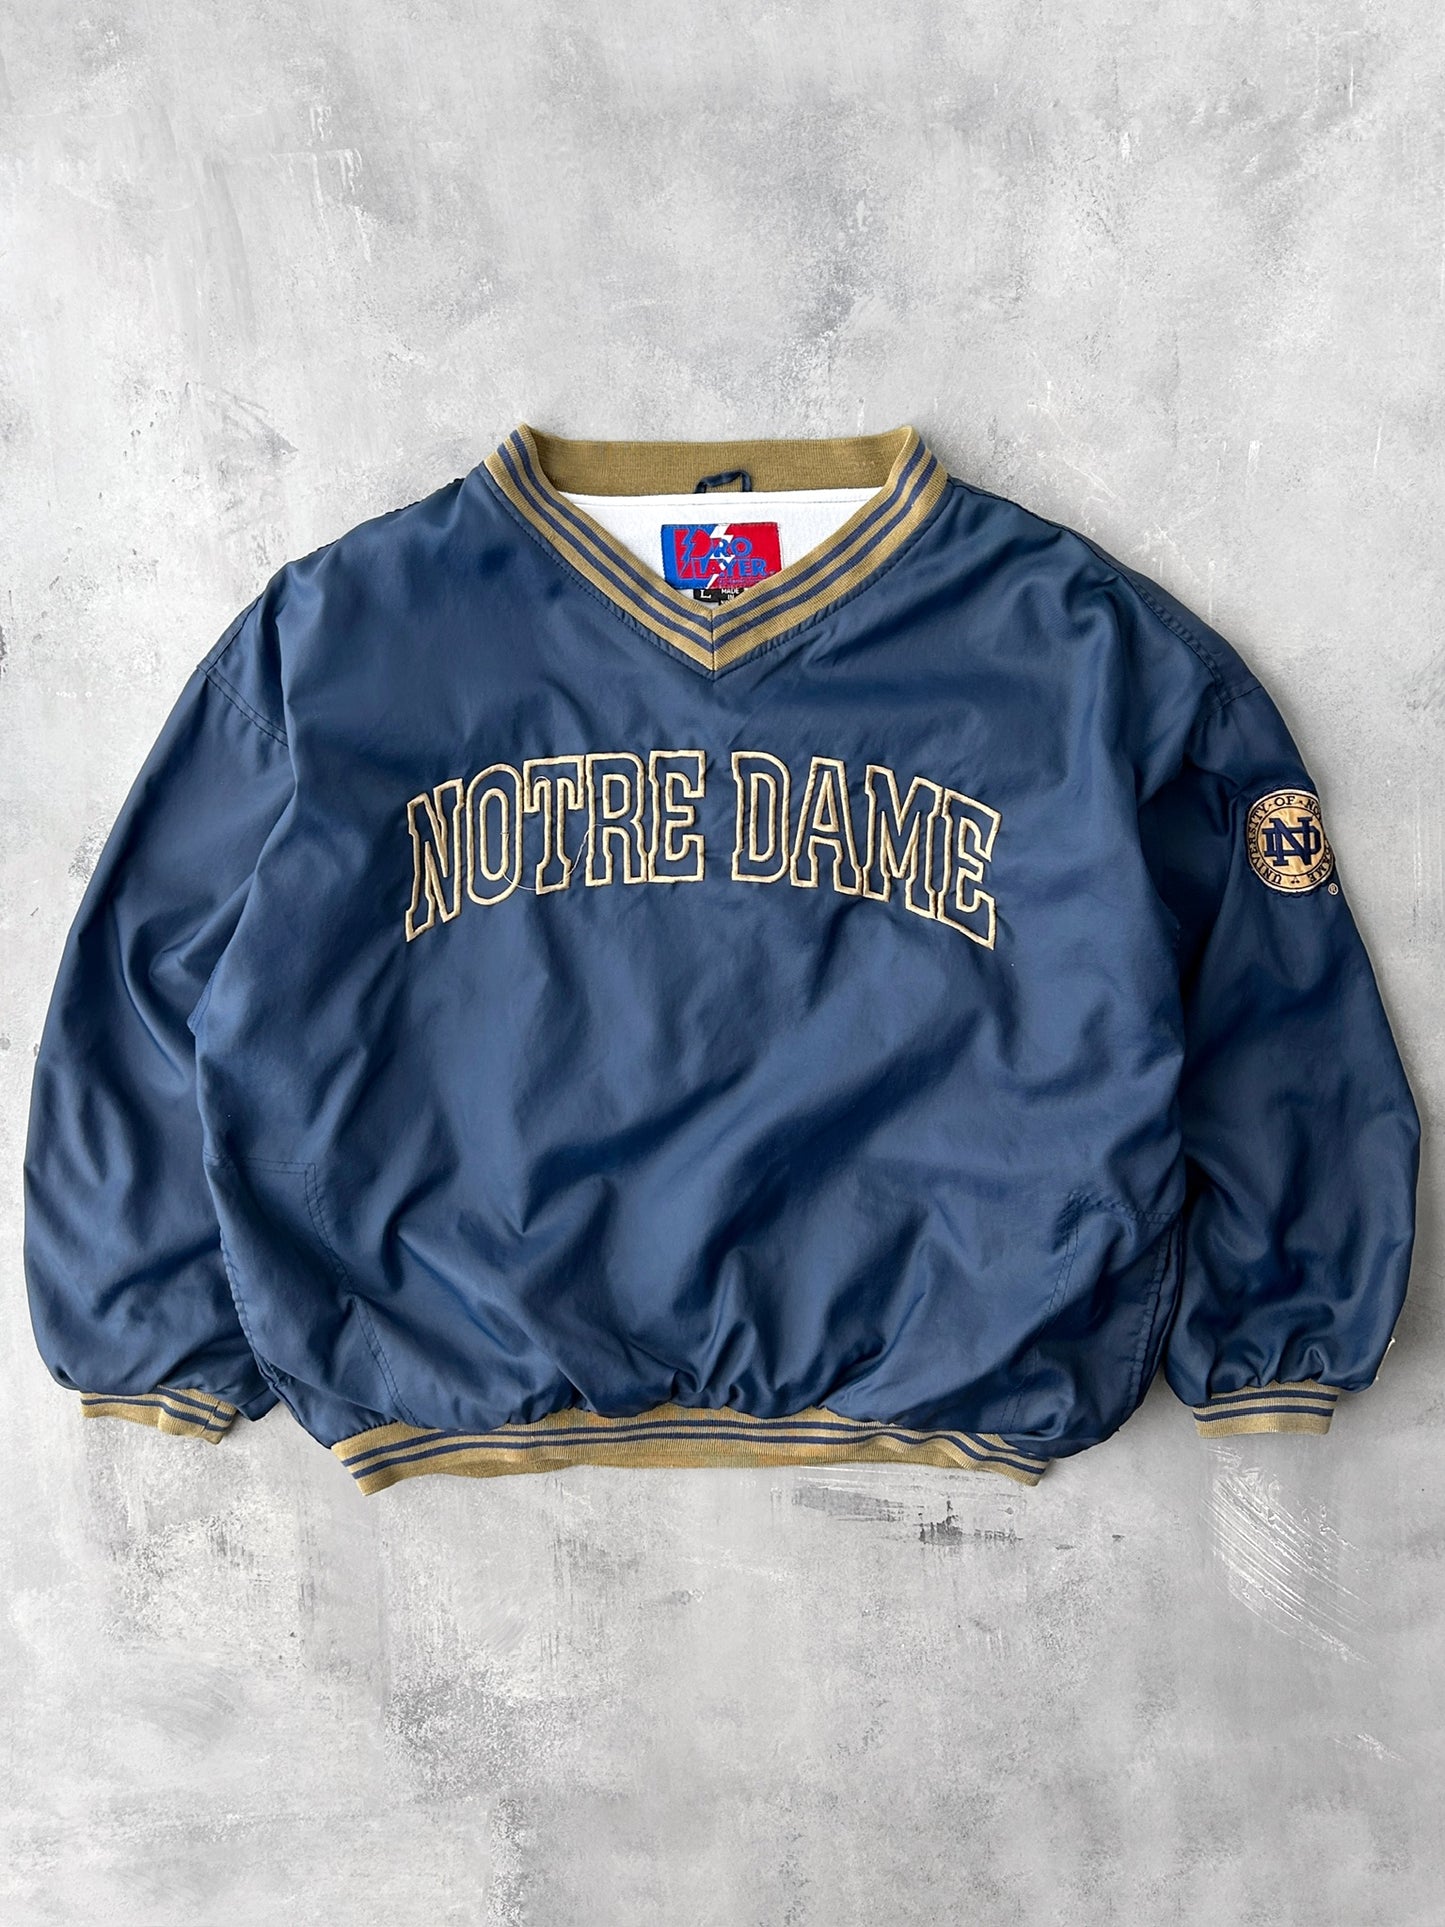 University of Notre Dame Pullover Jacket 90's - Large / XL